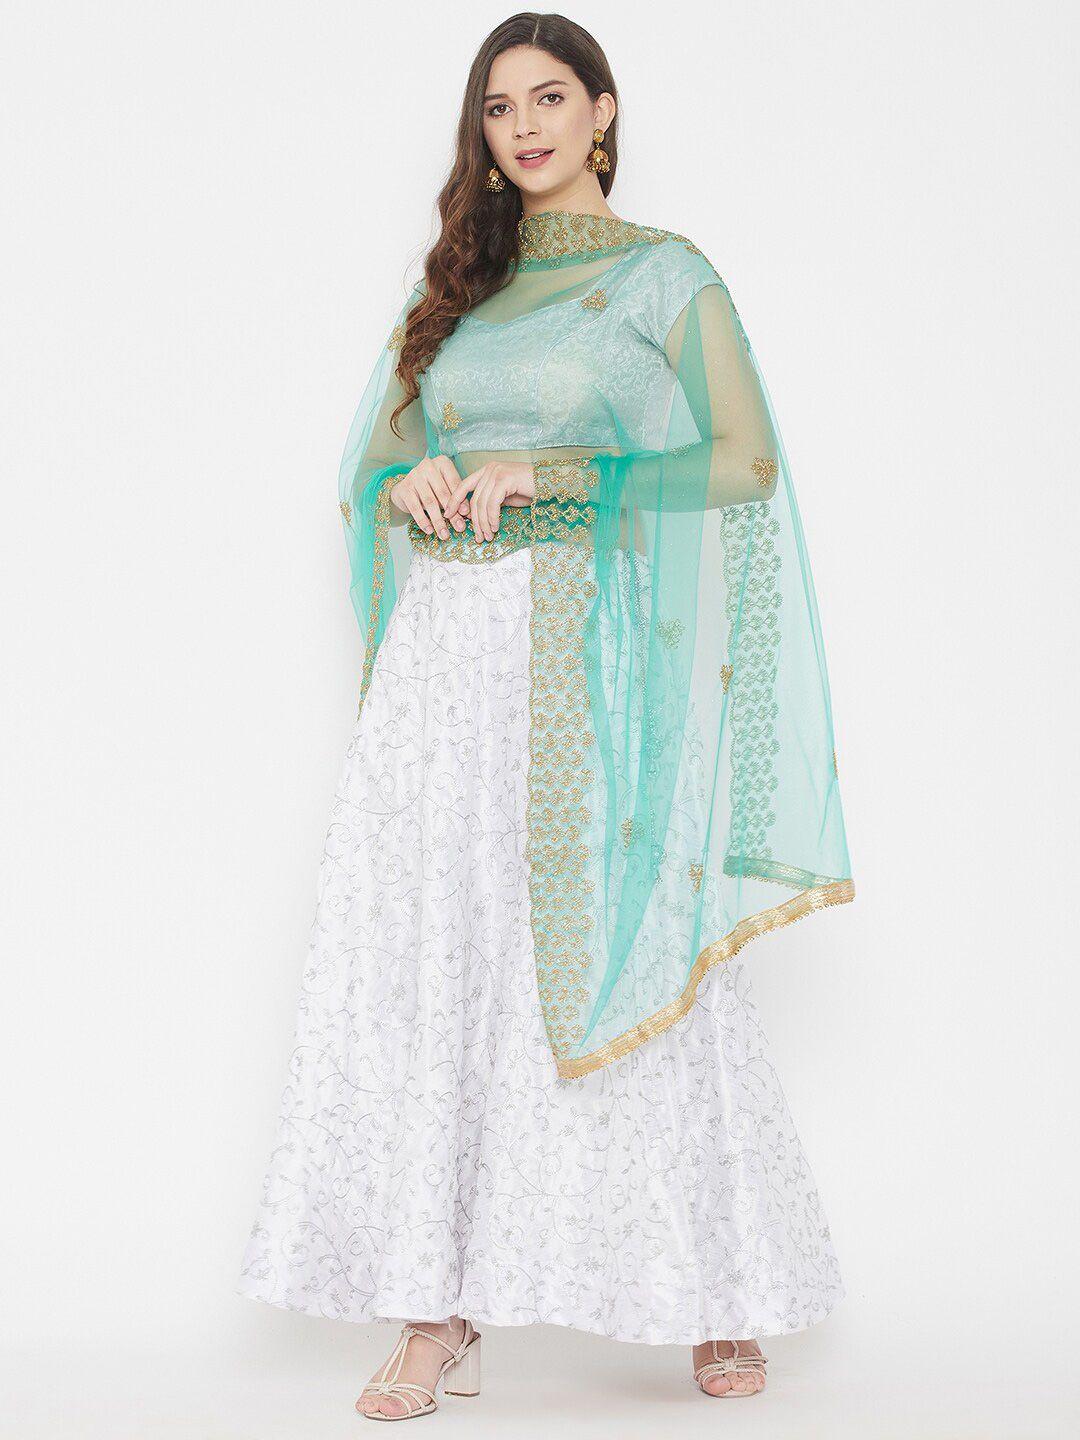 clora creation sea green & gold-toned ethnic motifs embroidered dupatta with beads and stones